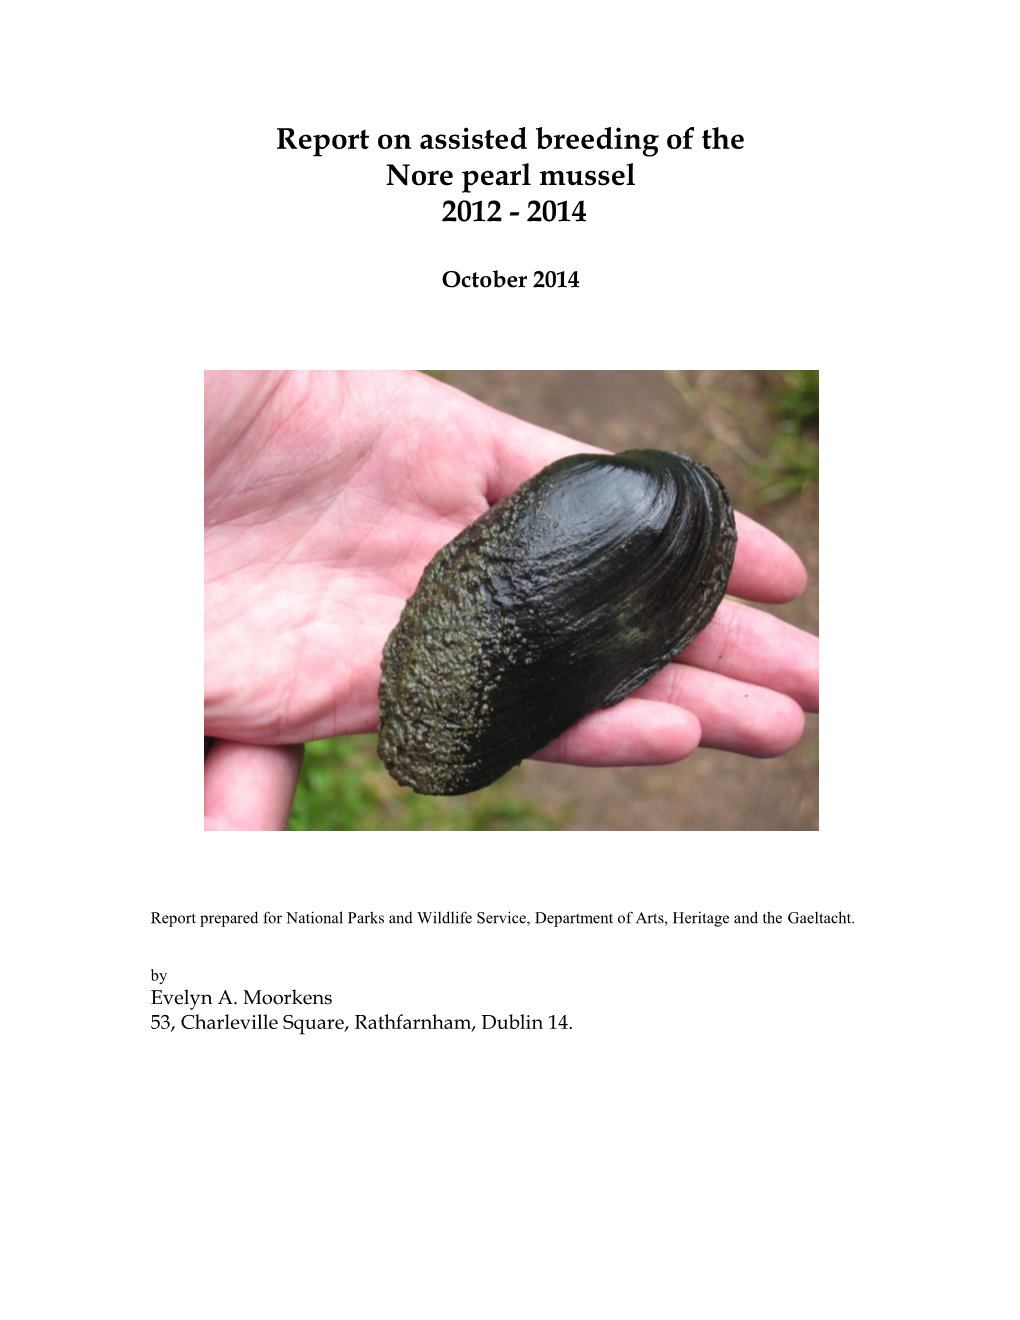 Report on Assisted Breeding of the Nore Pearl Mussel 2012 - 2014